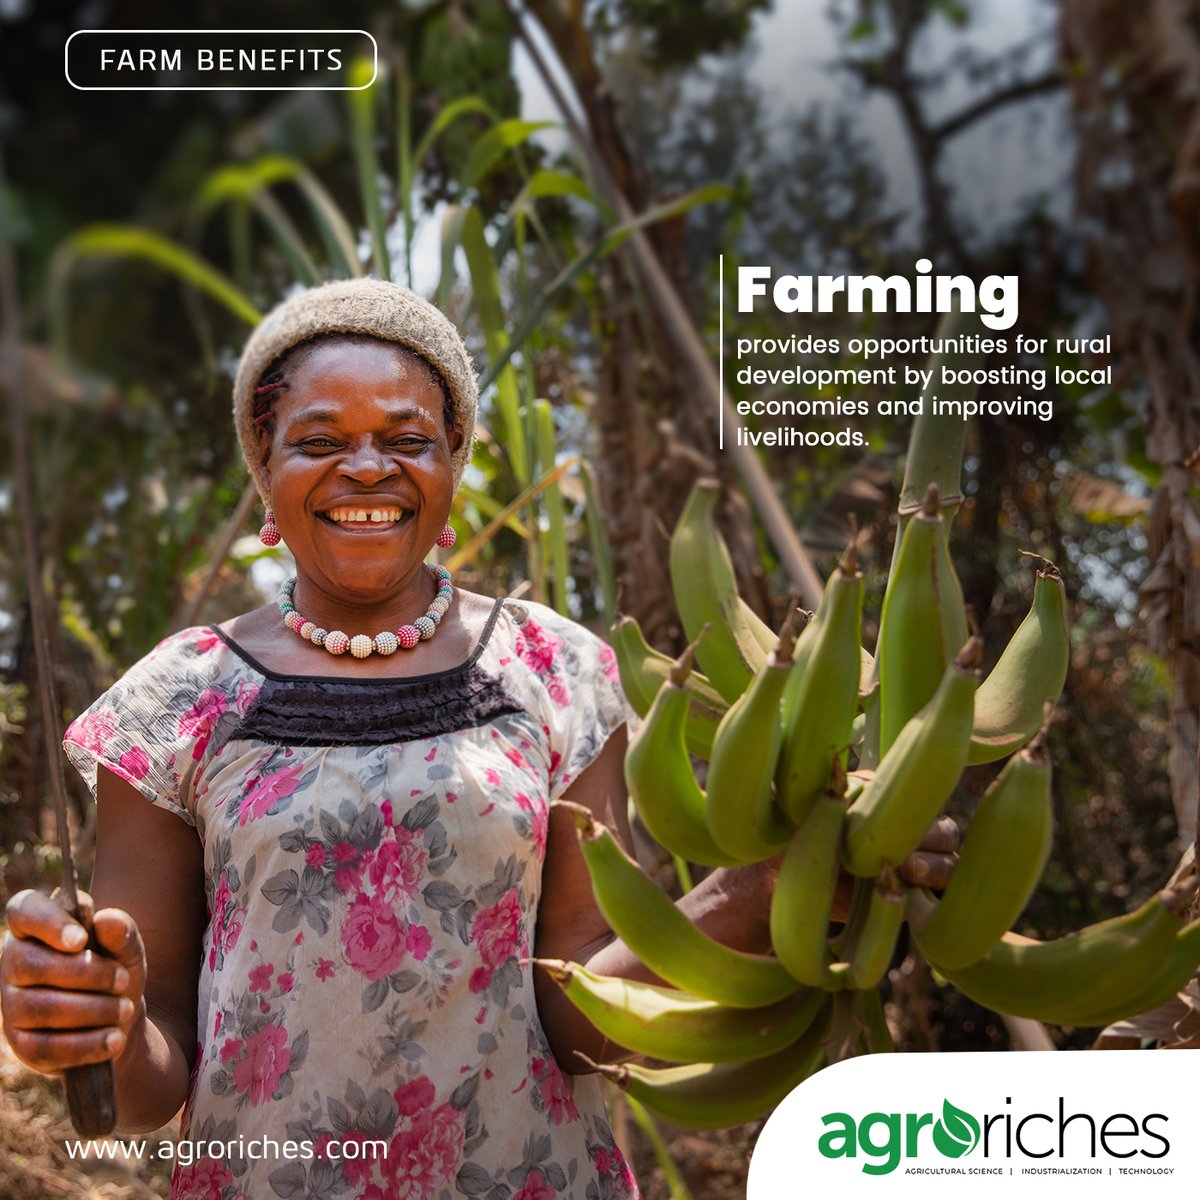 Farming provides opportunities for rural development.

#agroriches #agriculturaltrends #agriculturenews #exploreghana #trendinginghana #biodiversity #ghana #articles #farming #growth #agriculture #wildlife #crops #plants